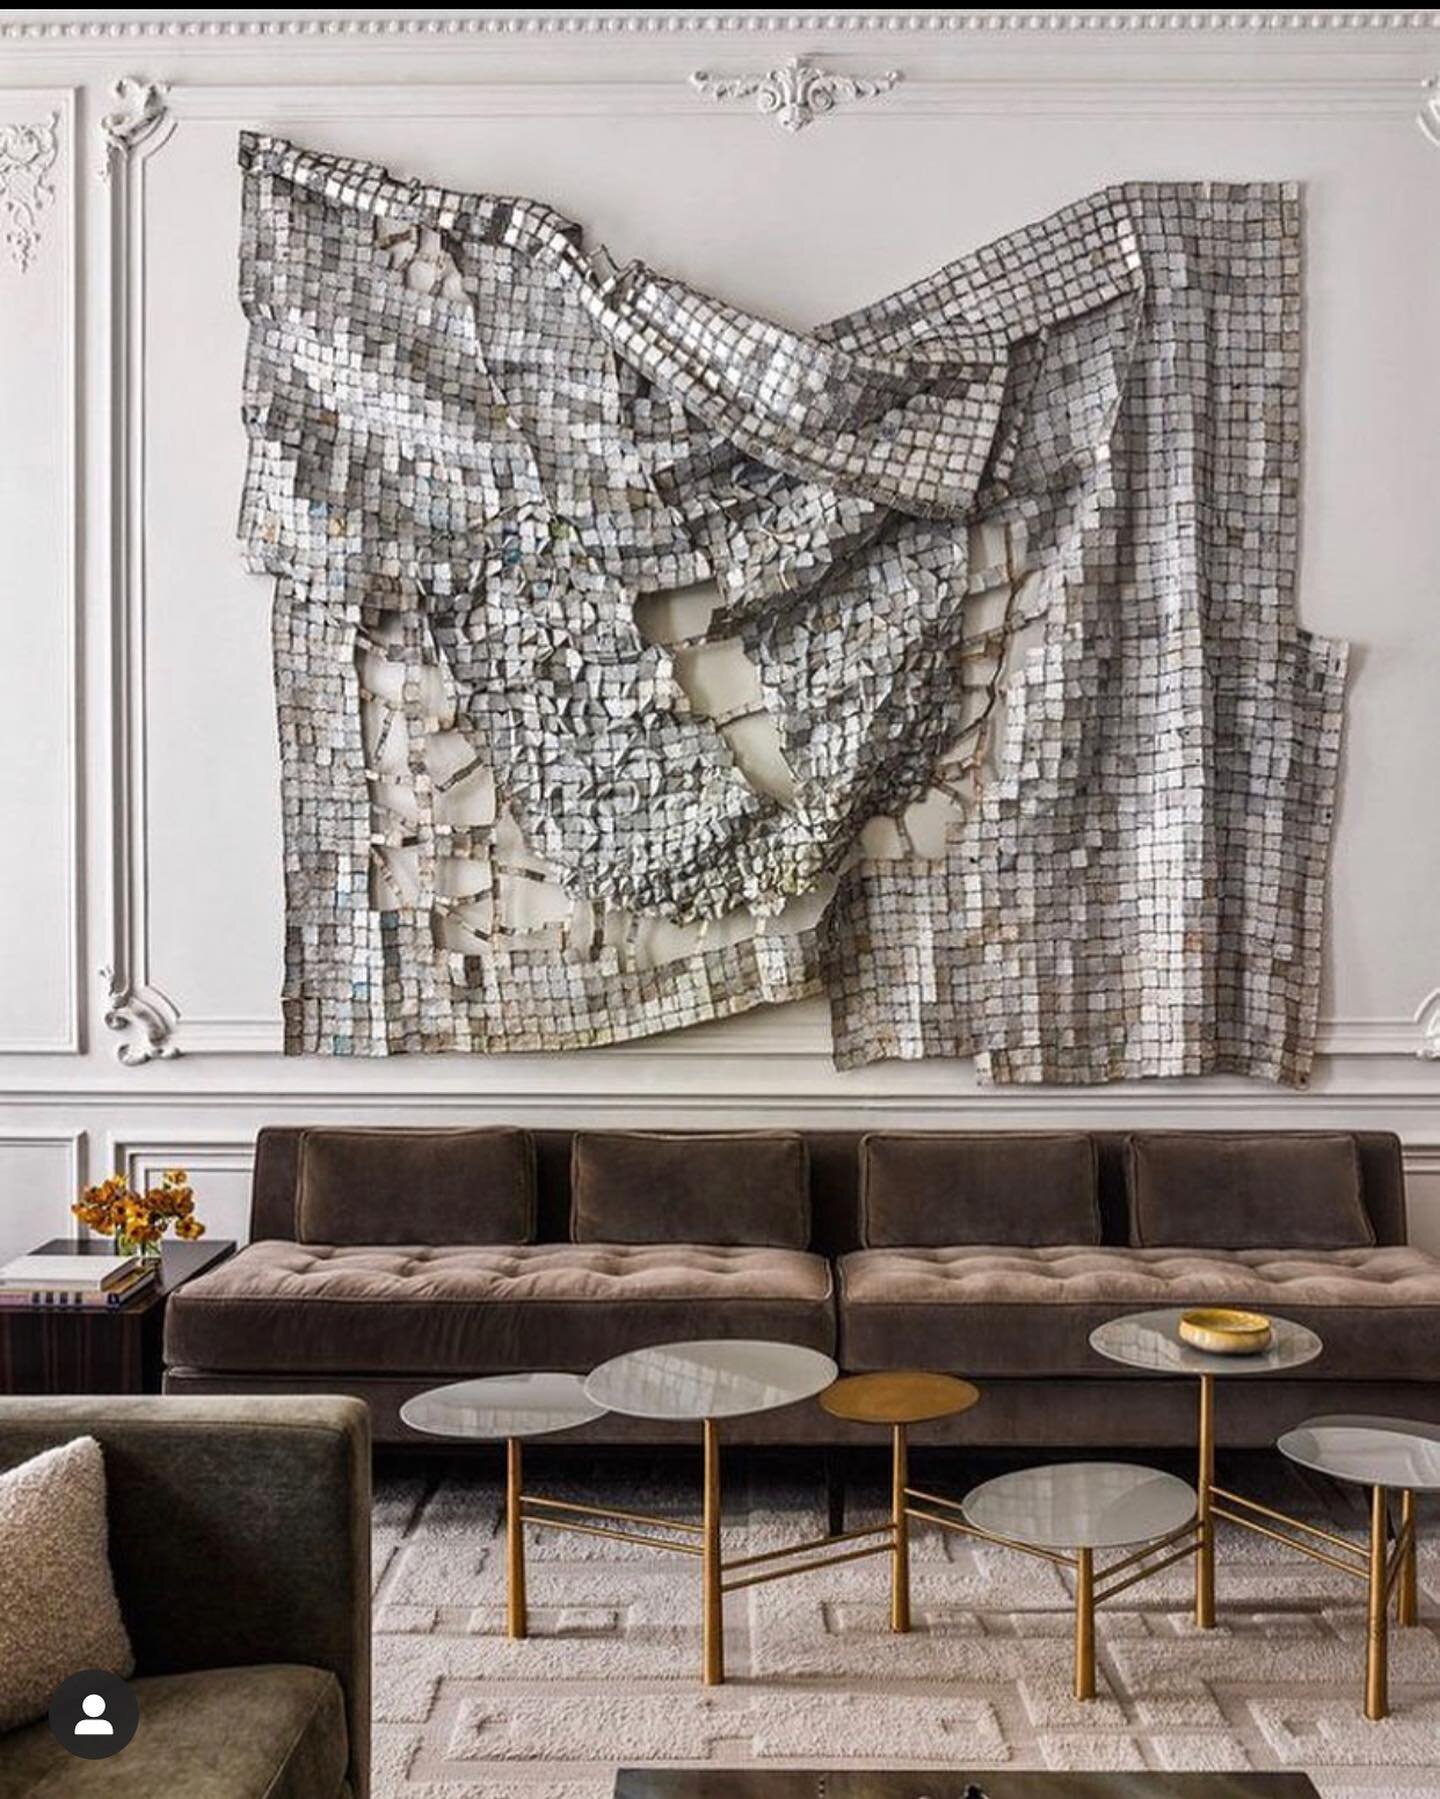 It&rsquo;s Tuesday, let&rsquo;s boogie. 🕺🏻

 #chainmail #interiors #moldings #interiors #interiordesign #inspiration